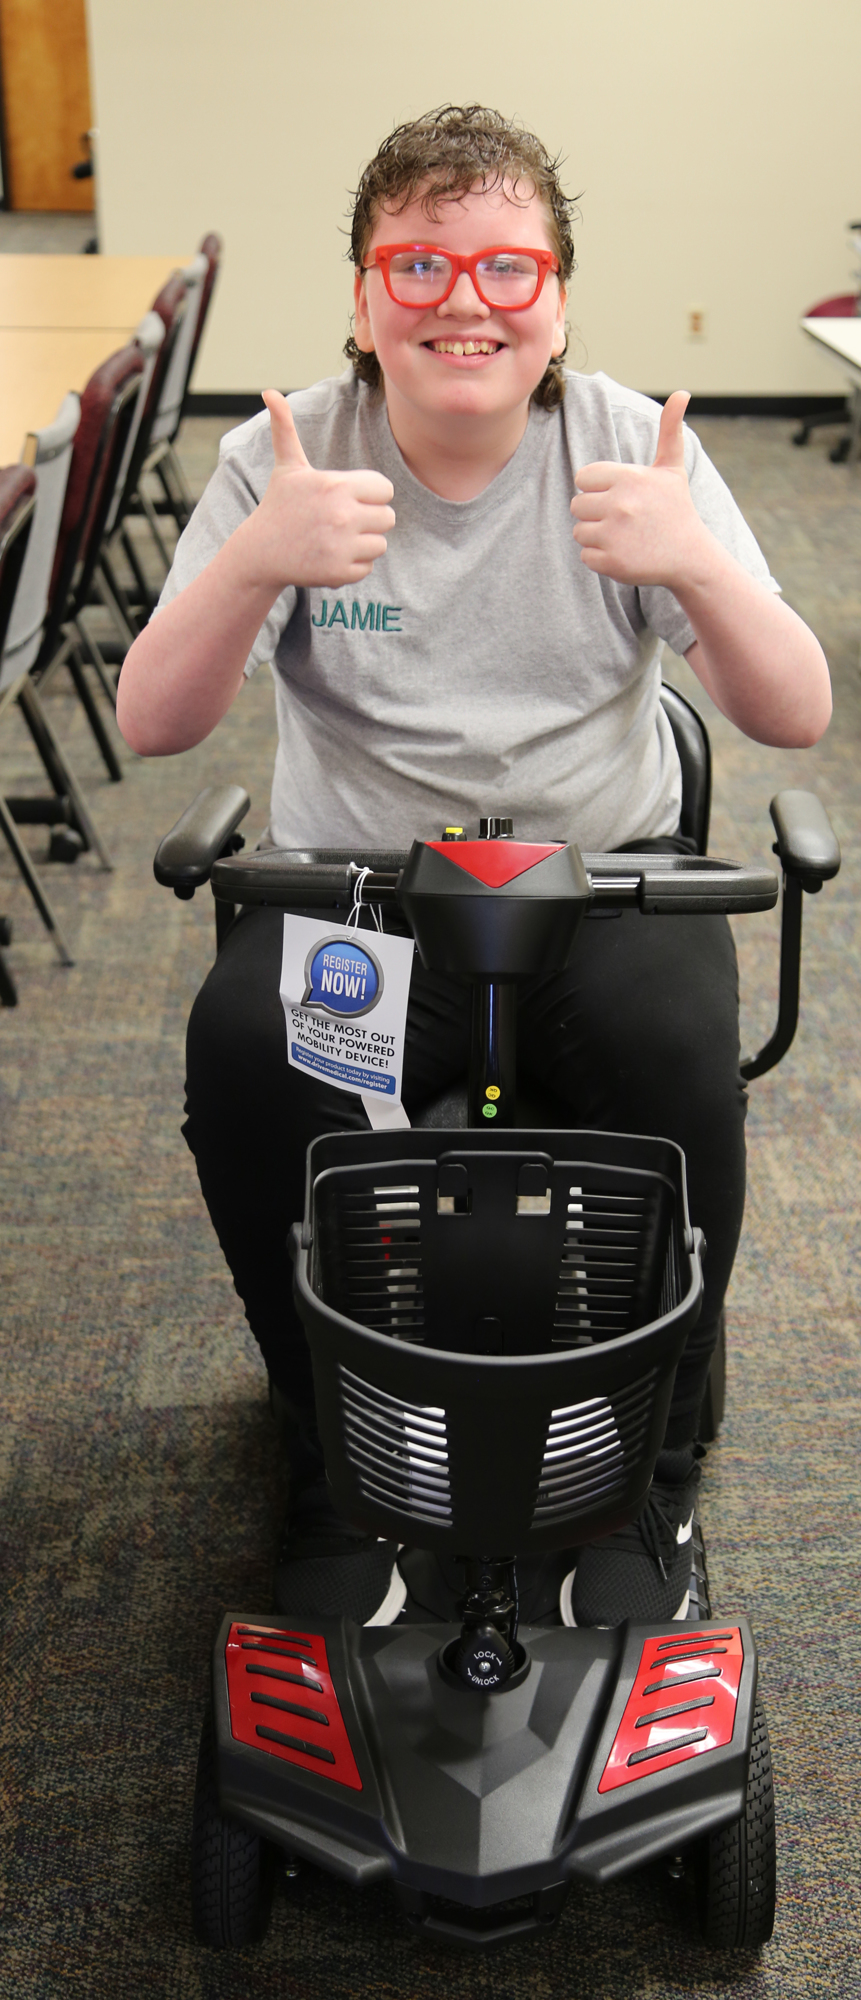 Thanks to additional funding, the organization was able to provide Jamie Cothron with a new motorized scooter last year.